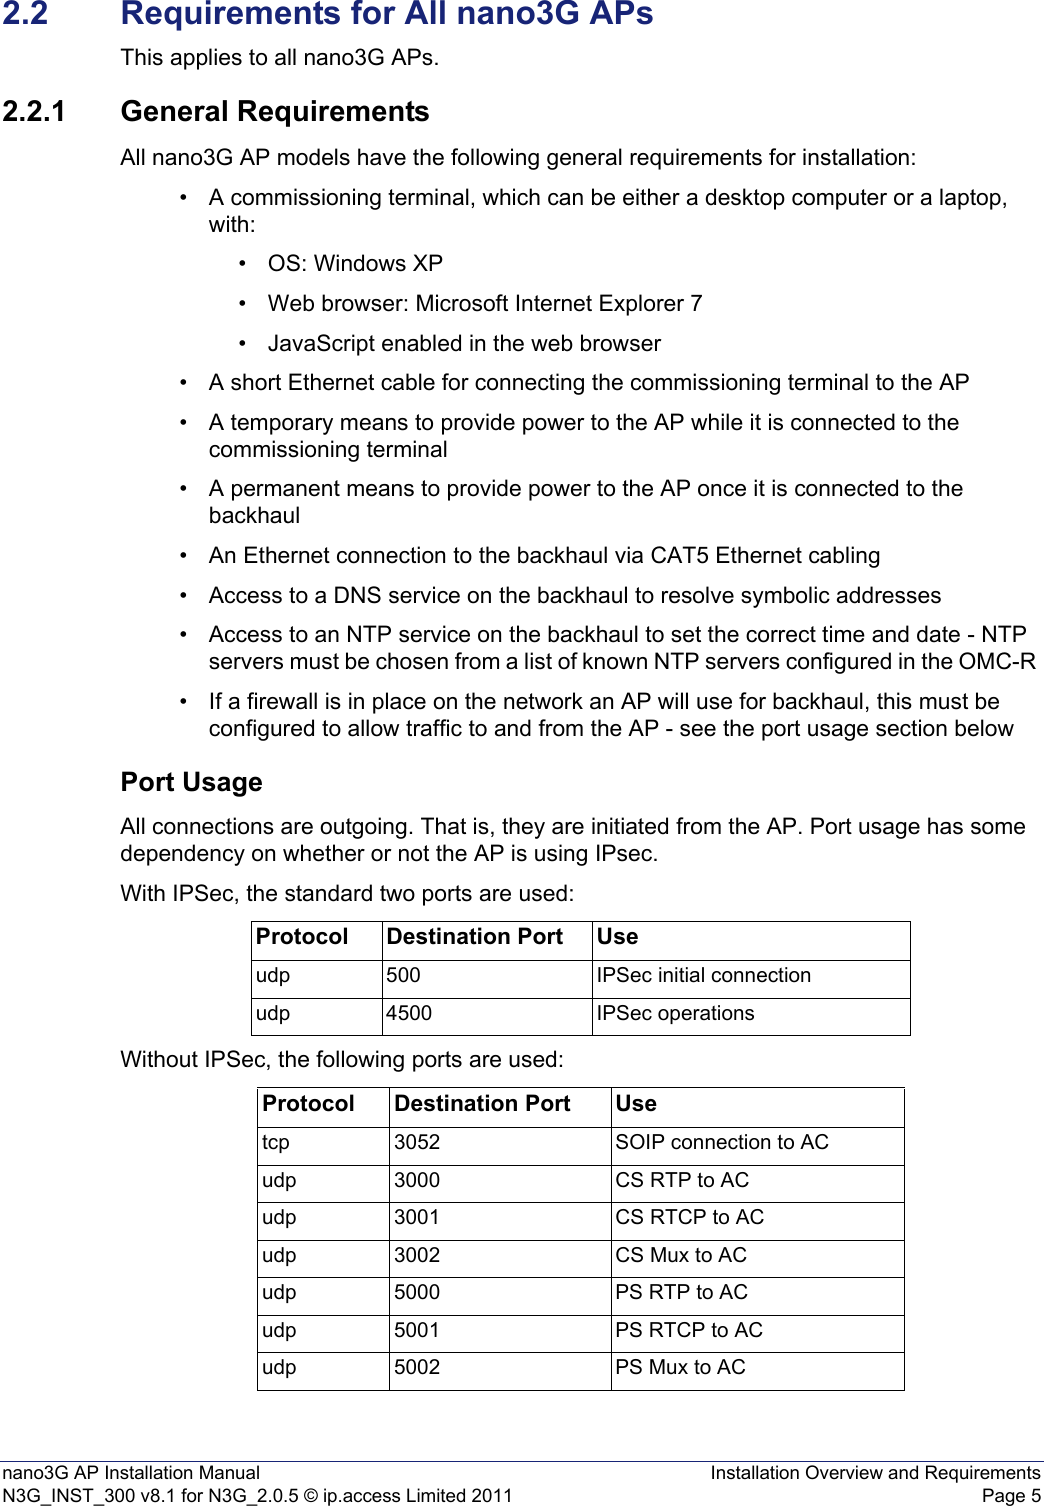 nano3G AP Installation Manual Installation Overview and RequirementsN3G_INST_300 v8.1 for N3G_2.0.5 © ip.access Limited 2011 Page 52.2 Requirements for All nano3G APsThis applies to all nano3G APs.2.2.1 General RequirementsAll nano3G AP models have the following general requirements for installation: • A commissioning terminal, which can be either a desktop computer or a laptop, with:• OS: Windows XP• Web browser: Microsoft Internet Explorer 7• JavaScript enabled in the web browser• A short Ethernet cable for connecting the commissioning terminal to the AP • A temporary means to provide power to the AP while it is connected to the commissioning terminal• A permanent means to provide power to the AP once it is connected to the backhaul• An Ethernet connection to the backhaul via CAT5 Ethernet cabling• Access to a DNS service on the backhaul to resolve symbolic addresses• Access to an NTP service on the backhaul to set the correct time and date - NTP servers must be chosen from a list of known NTP servers configured in the OMC-R • If a firewall is in place on the network an AP will use for backhaul, this must be configured to allow traffic to and from the AP - see the port usage section below Port UsageAll connections are outgoing. That is, they are initiated from the AP. Port usage has some dependency on whether or not the AP is using IPsec.With IPSec, the standard two ports are used:Without IPSec, the following ports are used:Protocol Destination Port Useudp 500 IPSec initial connectionudp 4500 IPSec operationsProtocol Destination Port Usetcp 3052 SOIP connection to ACudp 3000 CS RTP to ACudp 3001 CS RTCP to ACudp 3002 CS Mux to ACudp 5000 PS RTP to ACudp 5001 PS RTCP to ACudp 5002 PS Mux to AC